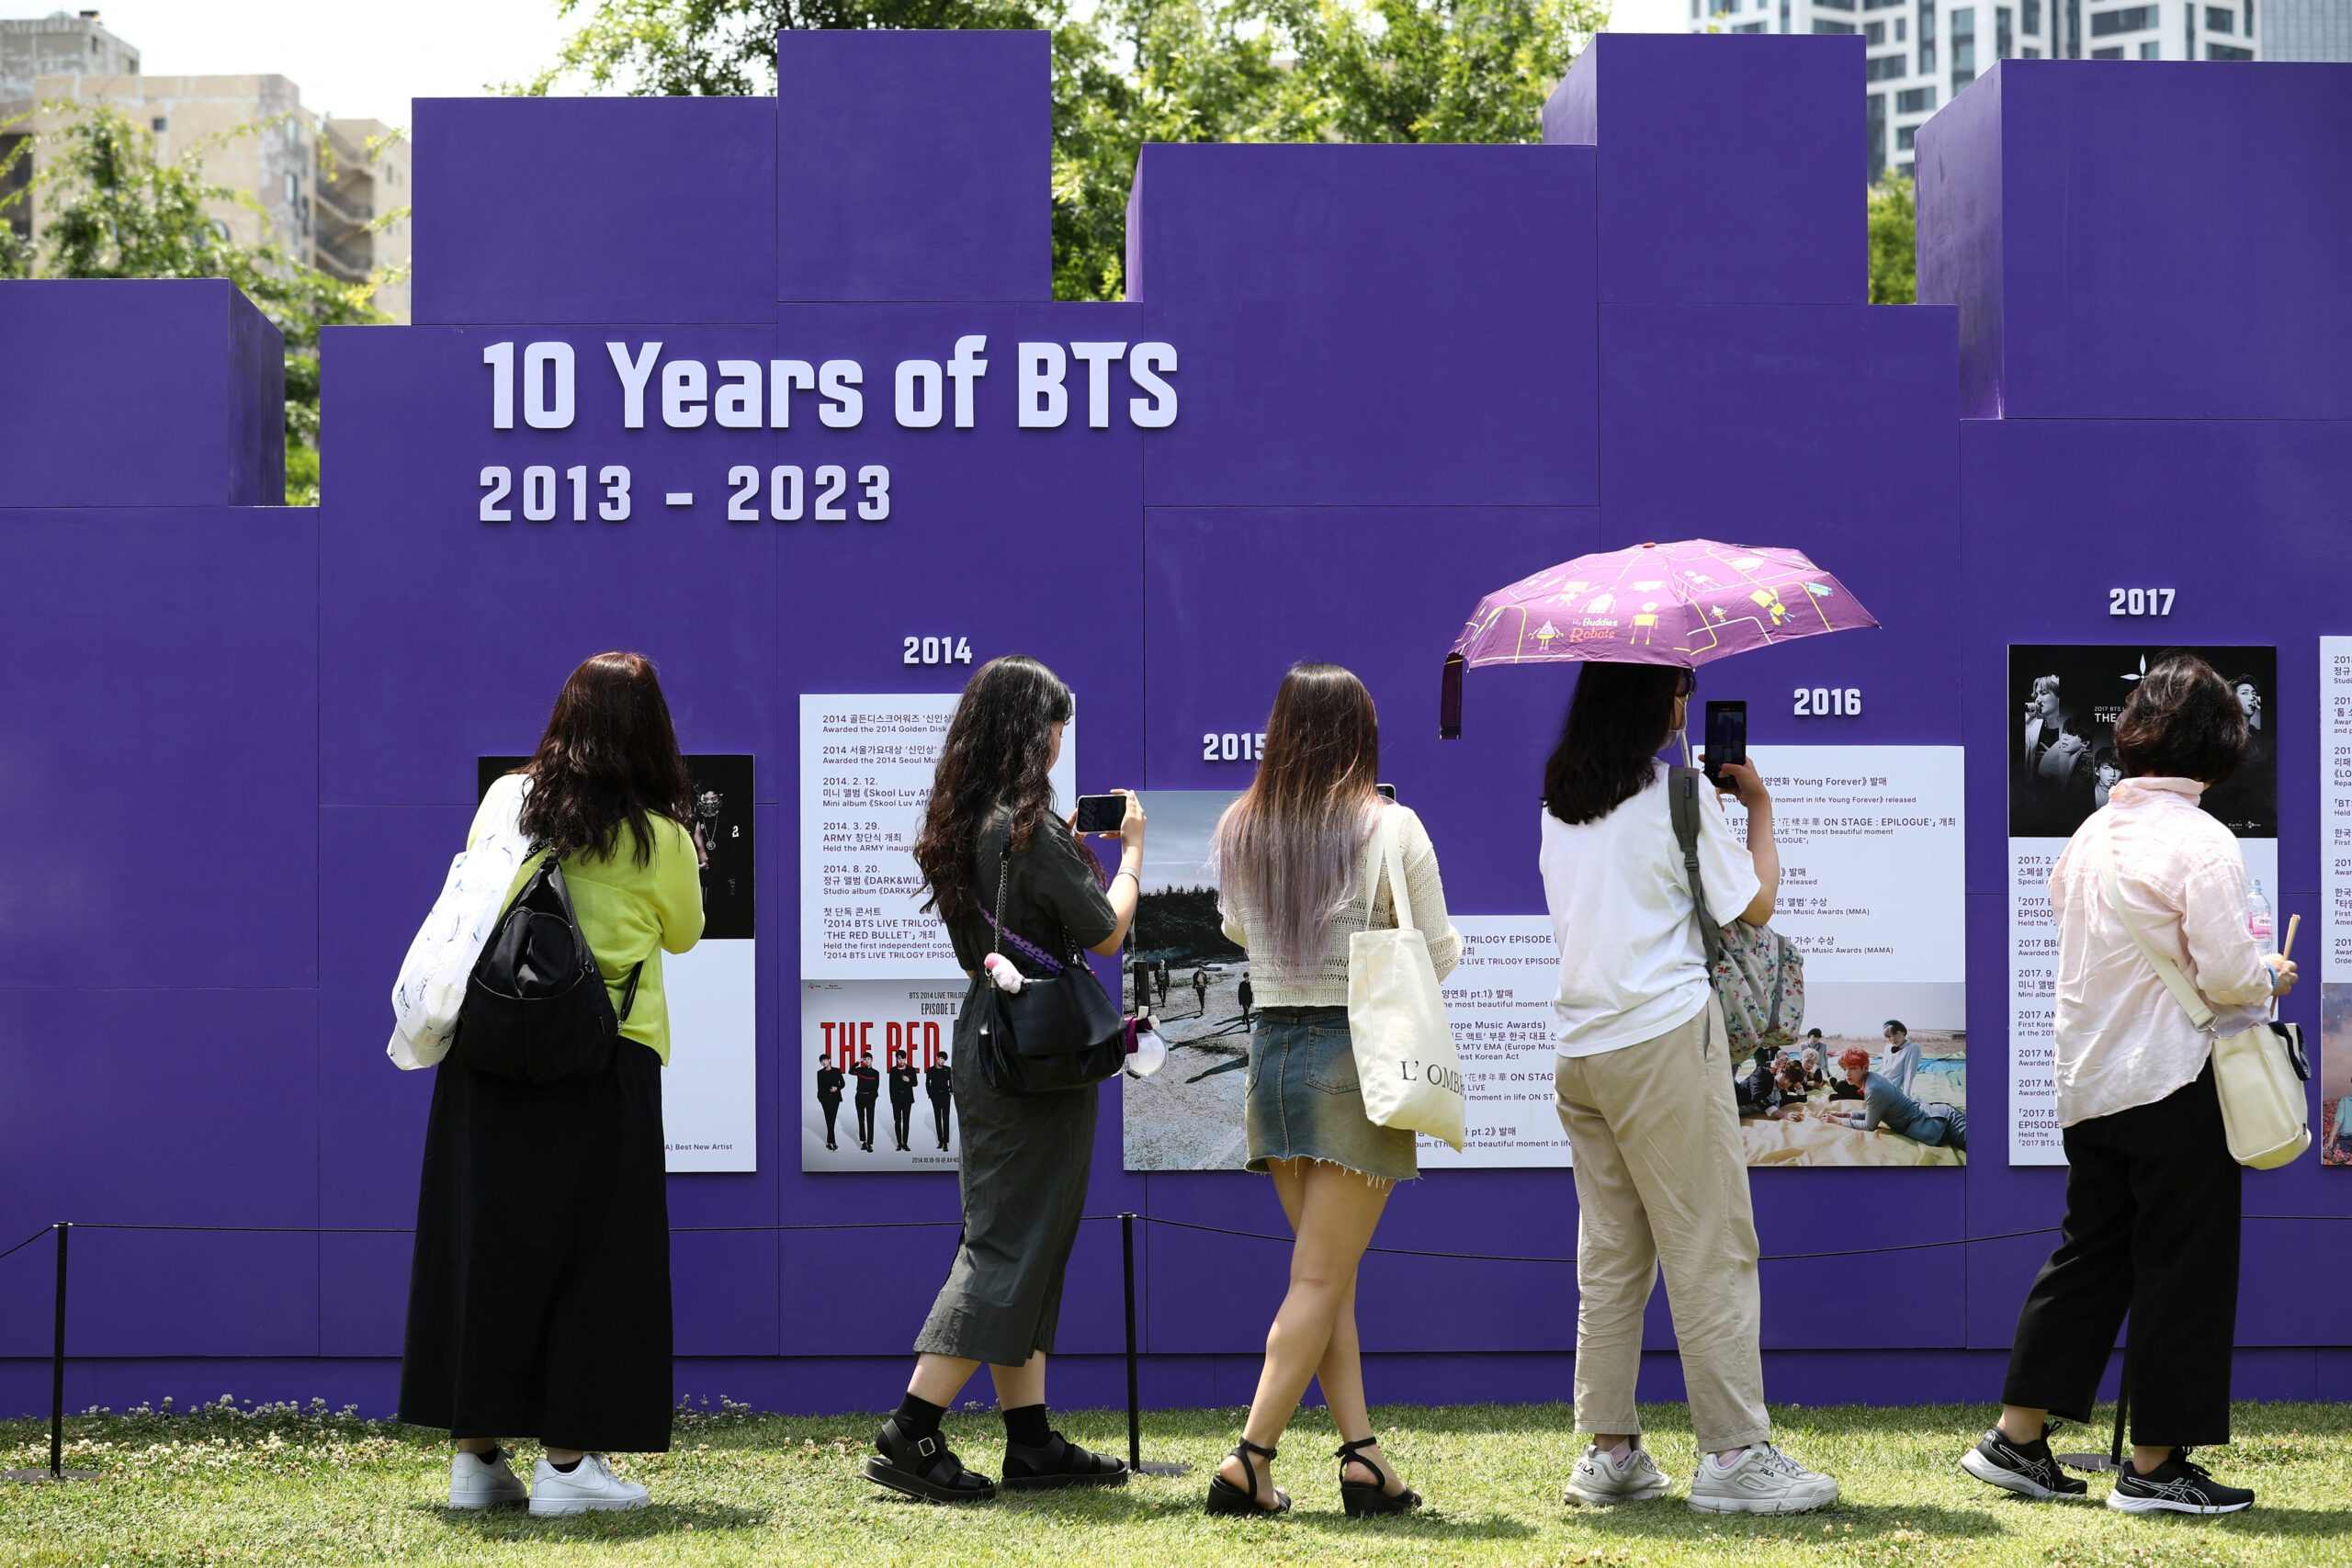 Seoul hosts large crowds as BTS fans celebrate 10th anniversary